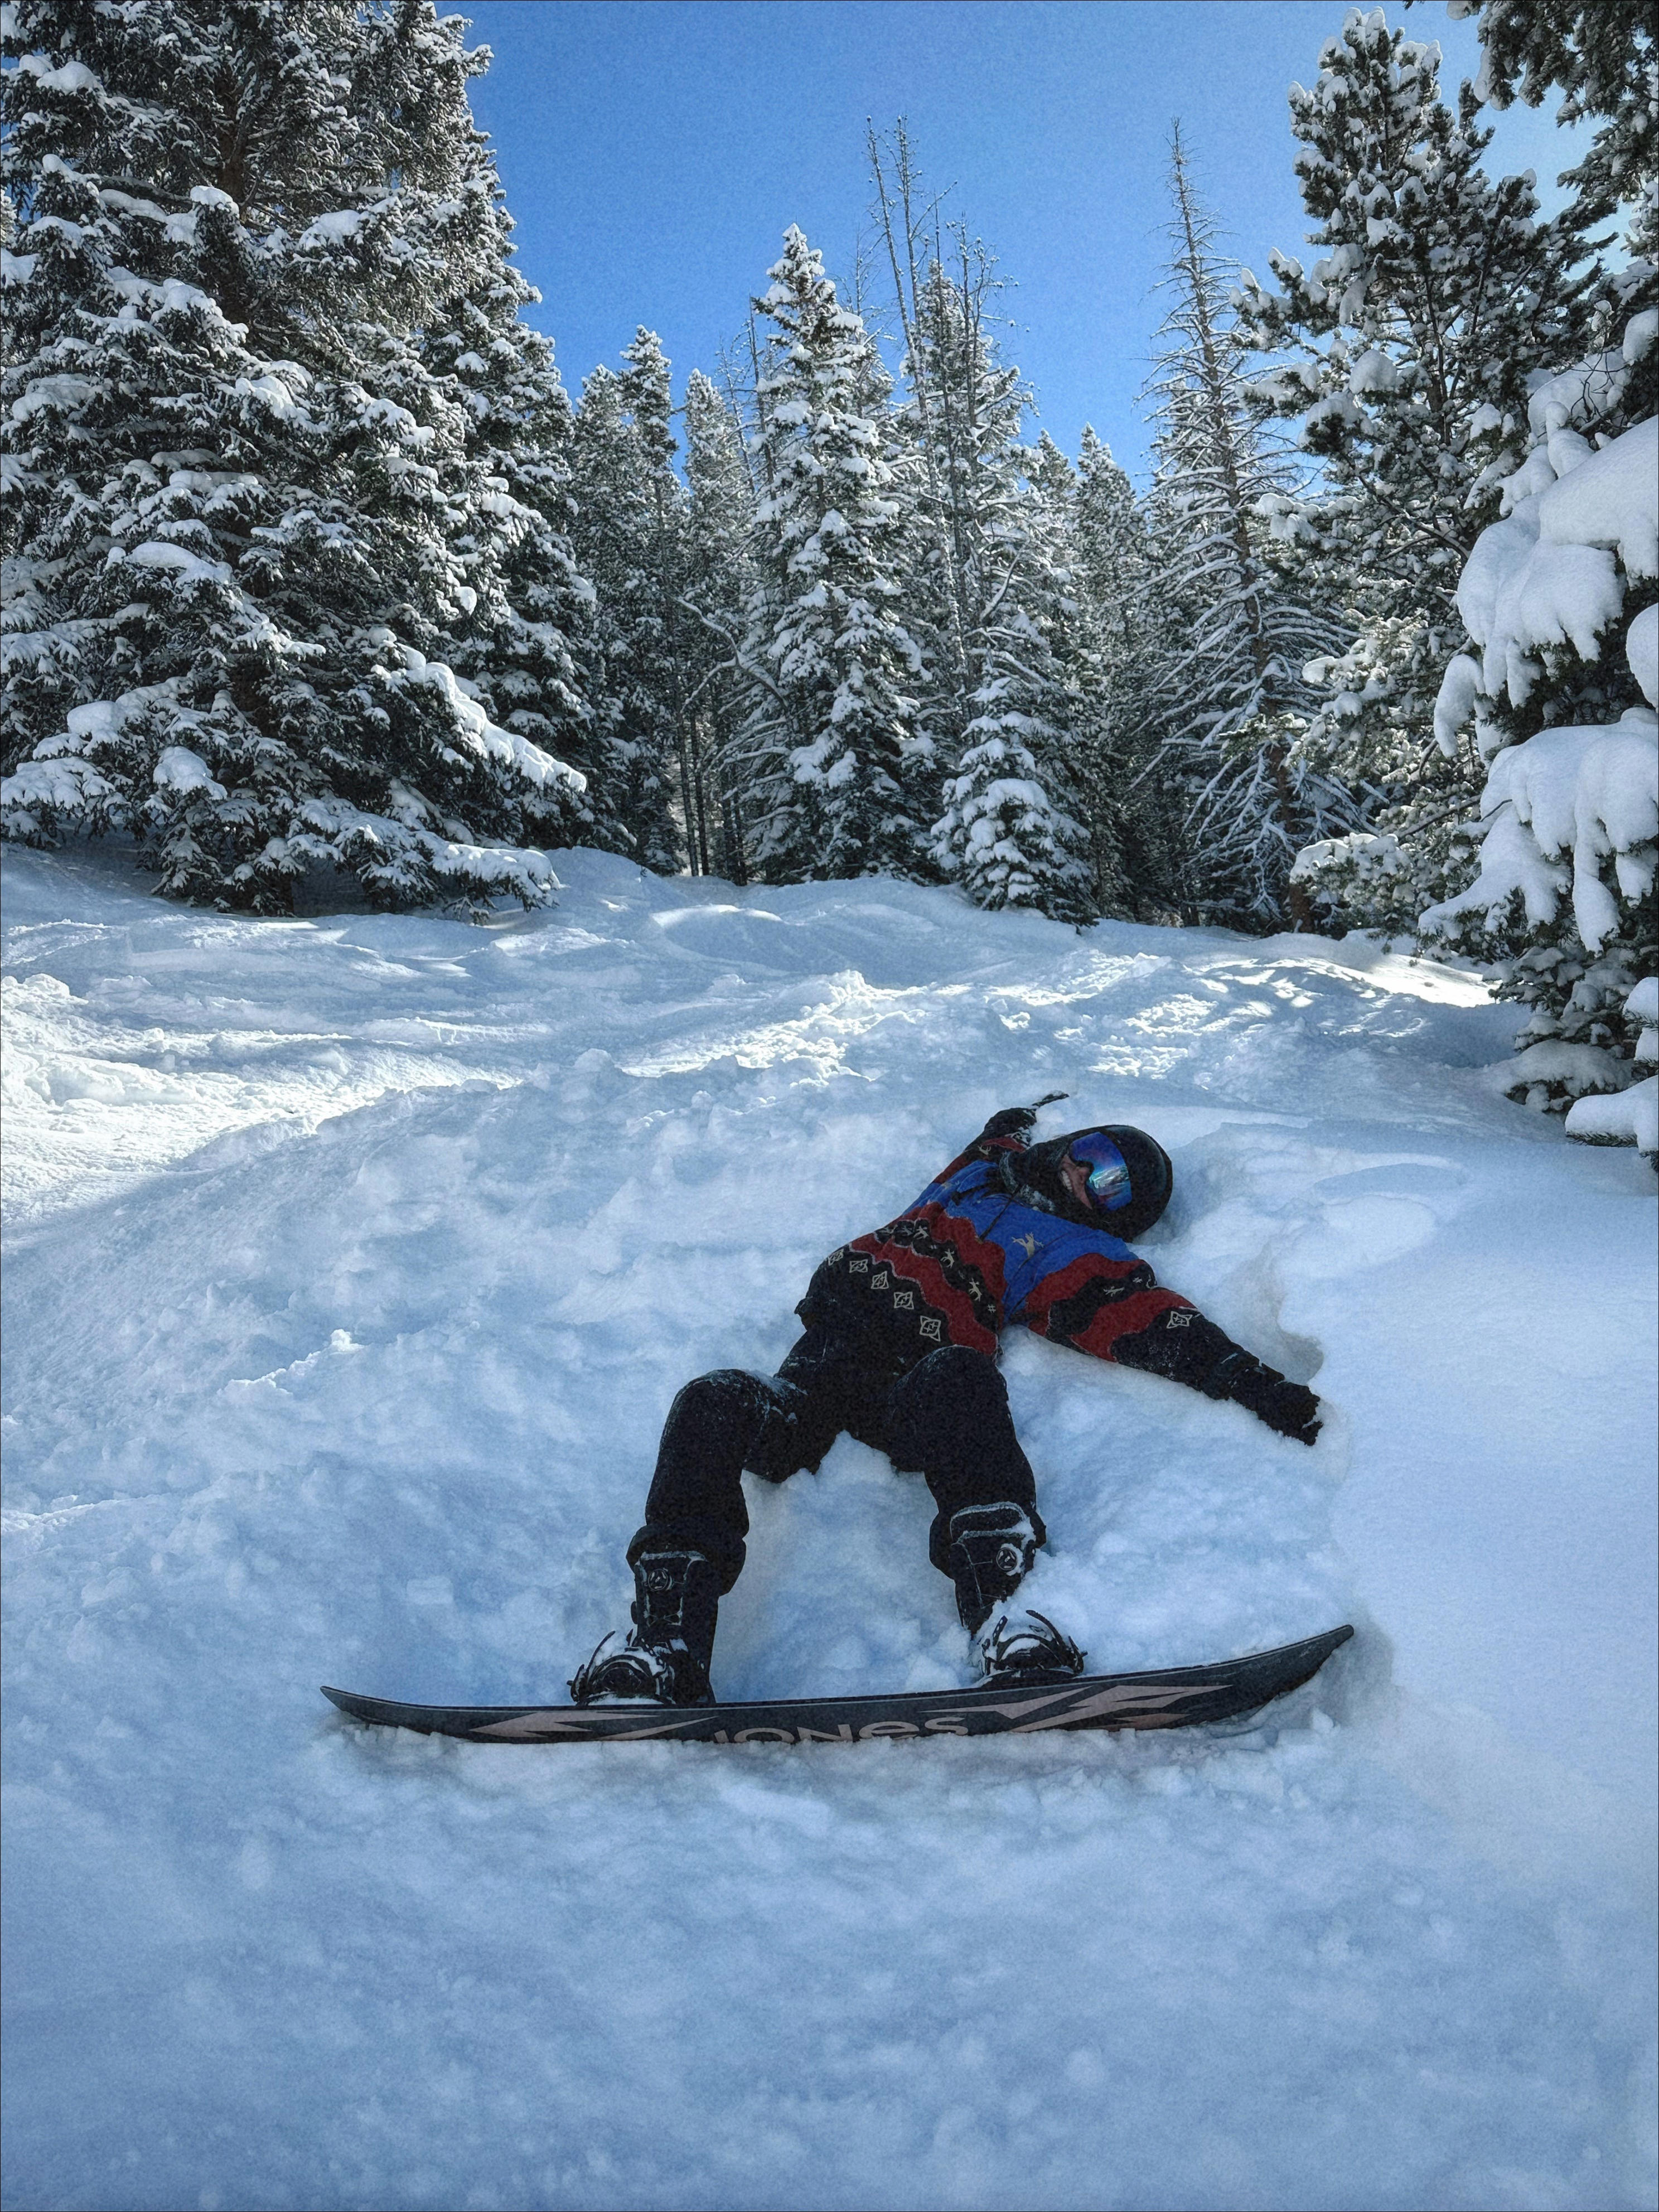 microsoft, i moved to a ski town and haven't looked back. working at a resort gets busy, but i can travel and ski in my time off.